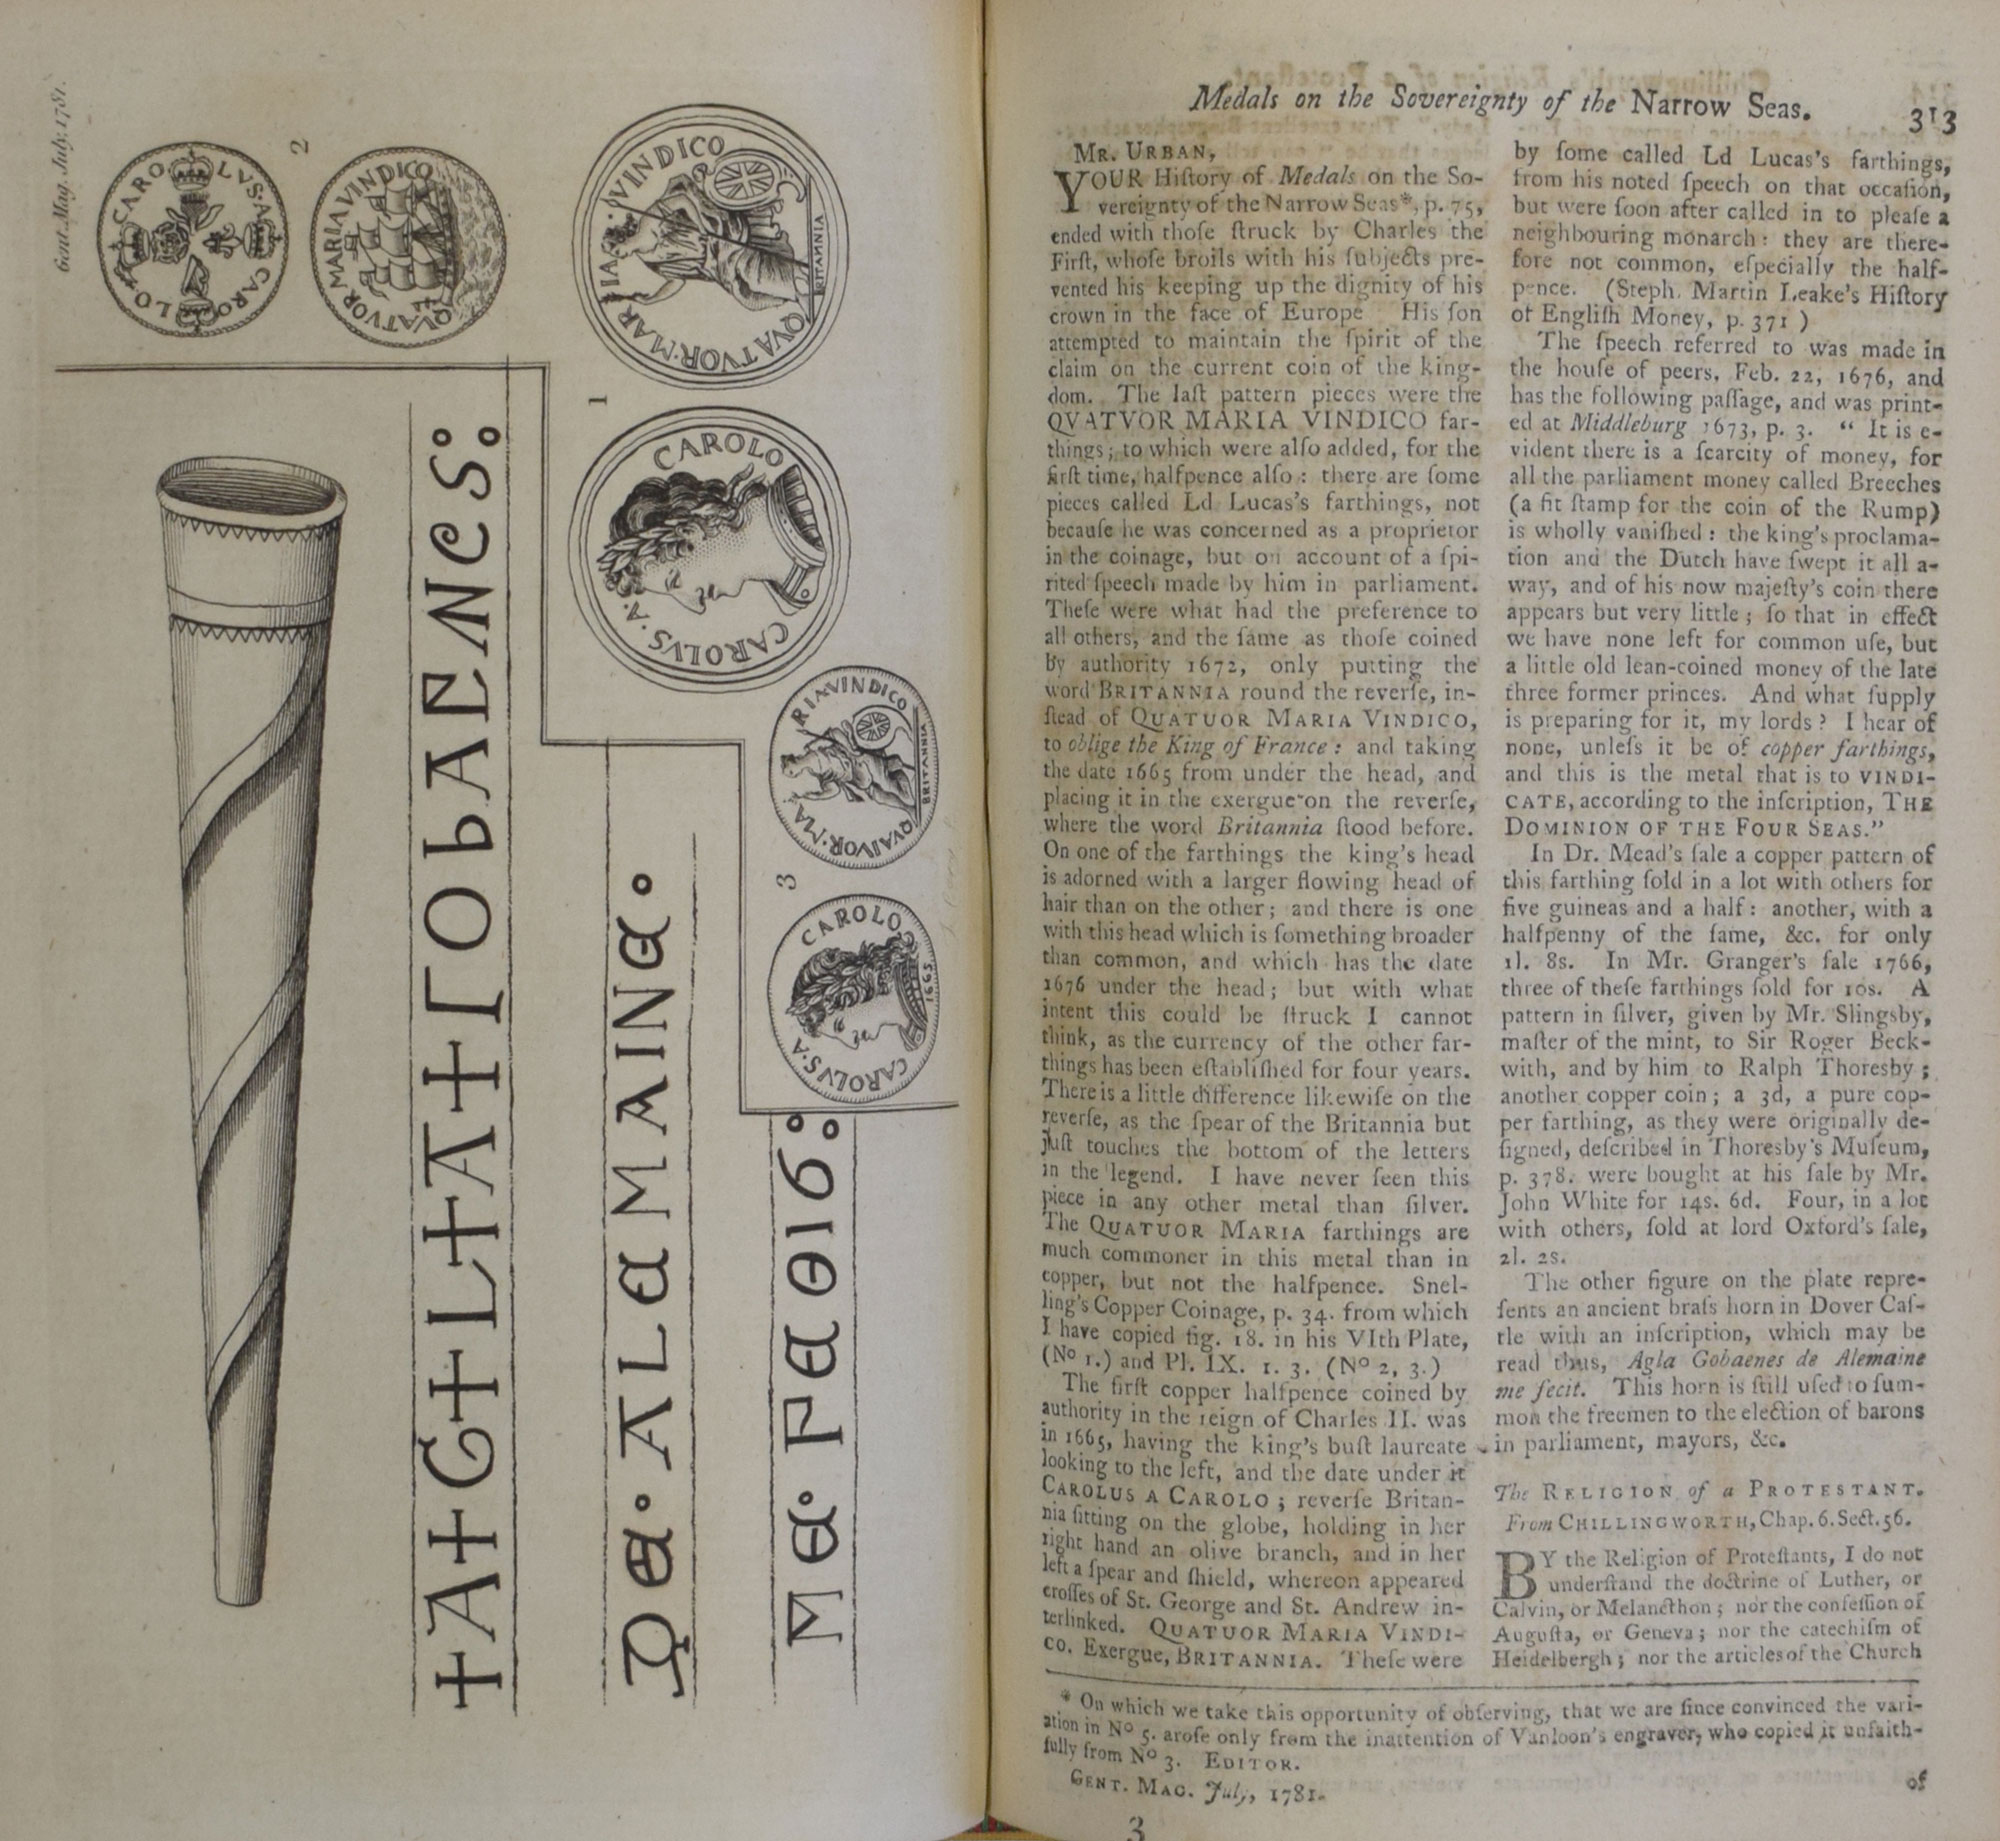 The Gentleman's Magazine and Historical Chronicle. Volume LI (51) January to December 1781.